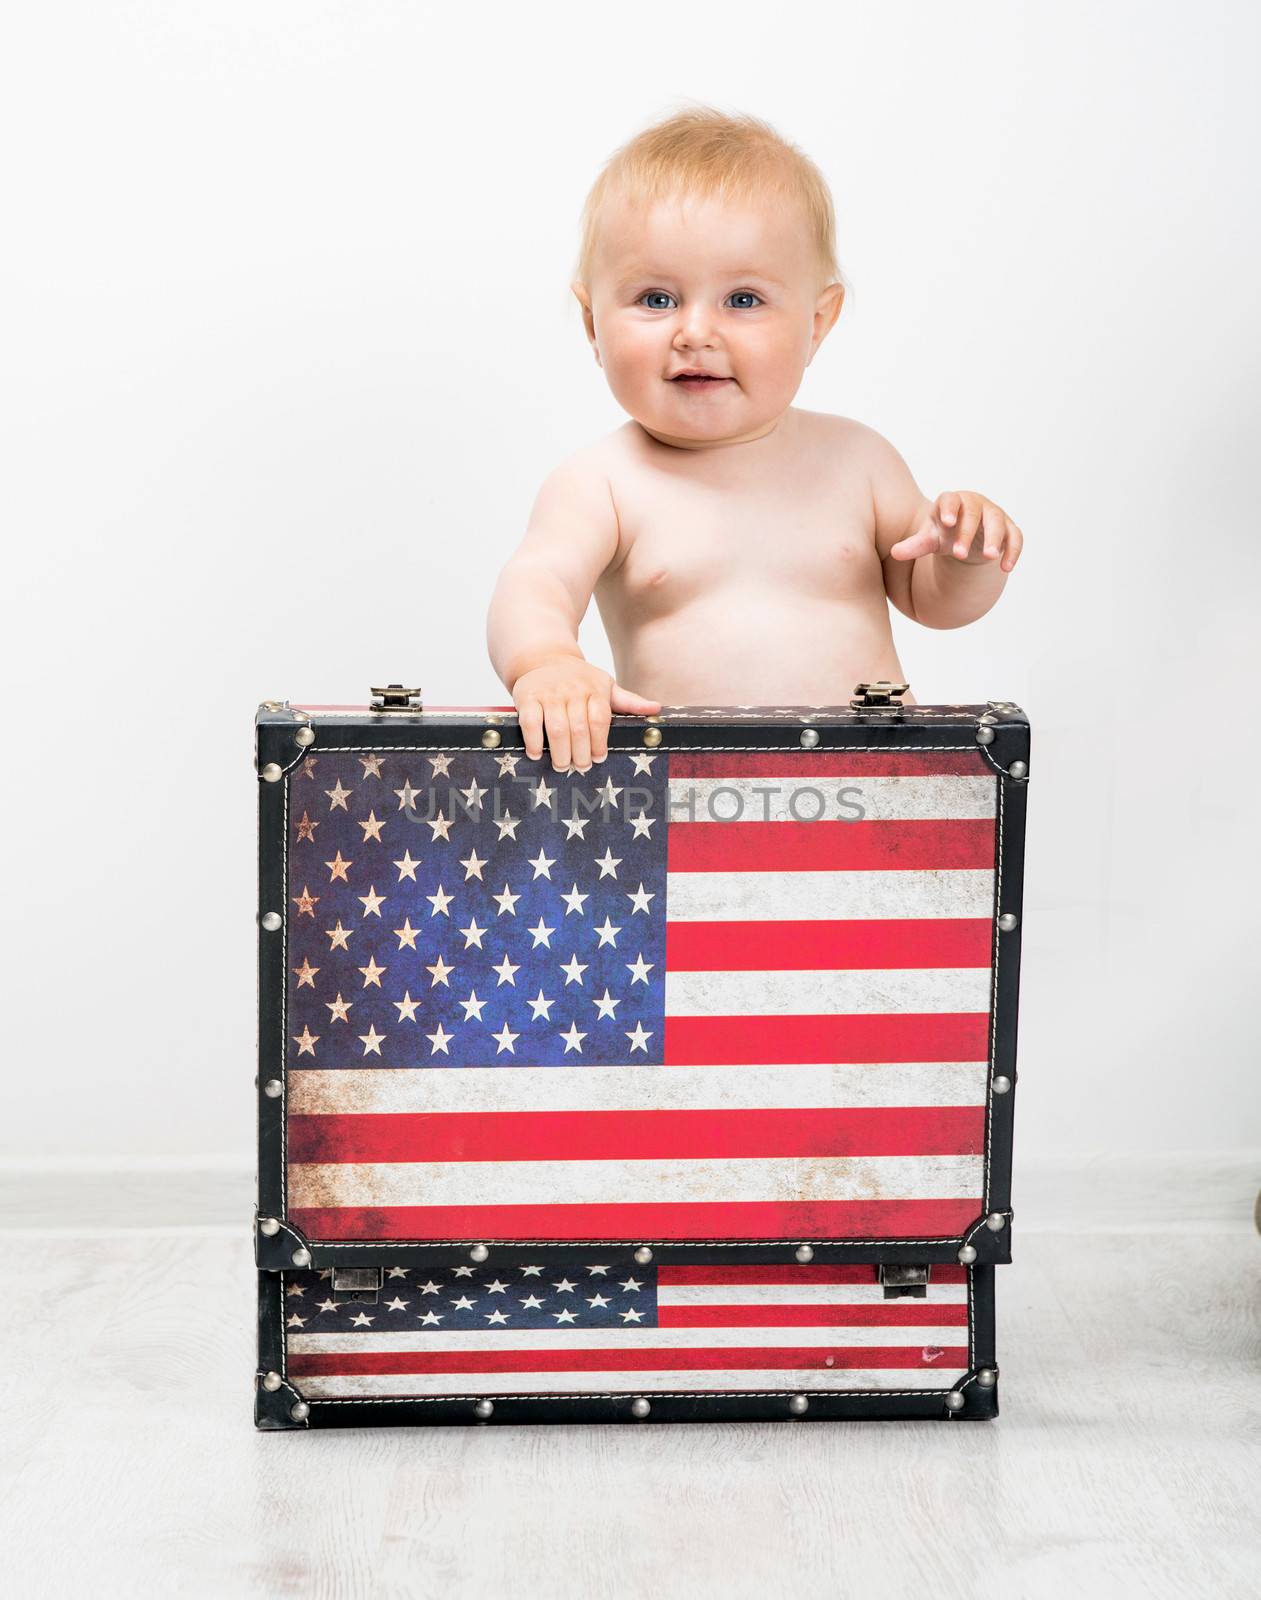 baby with a suitcase in colors of American flag